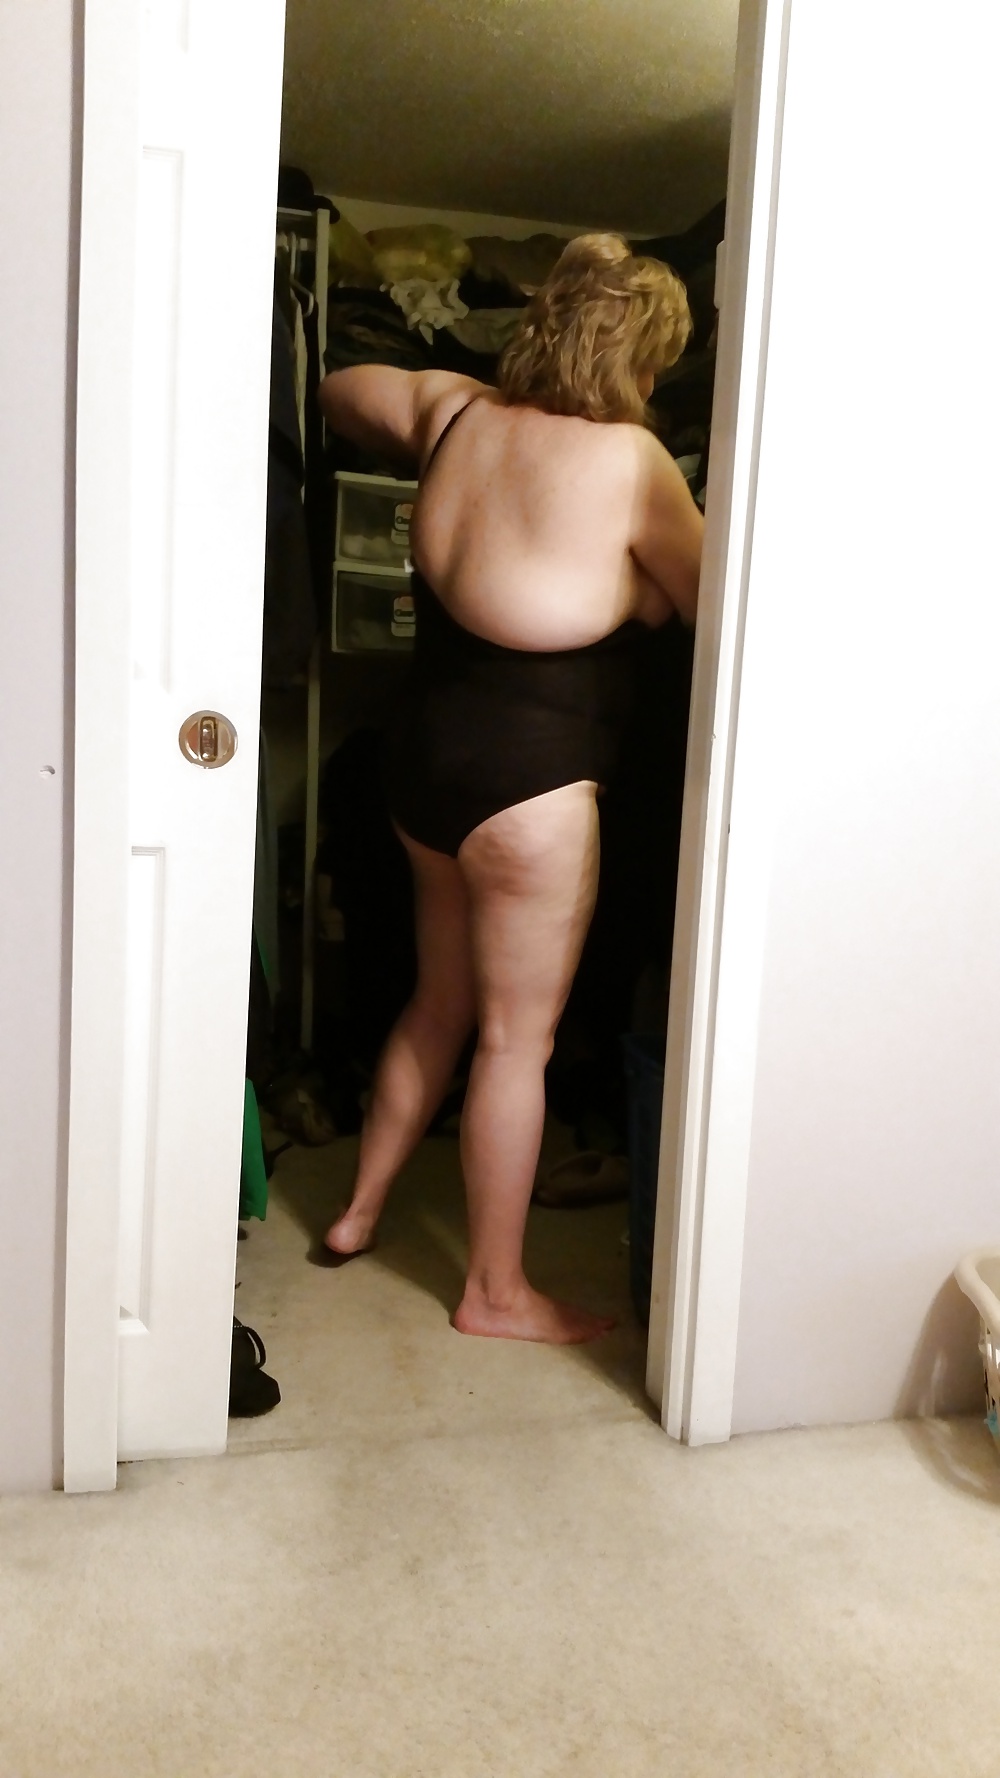 Bbw wife half dressed & naked,hairy pussy, big tits,belly